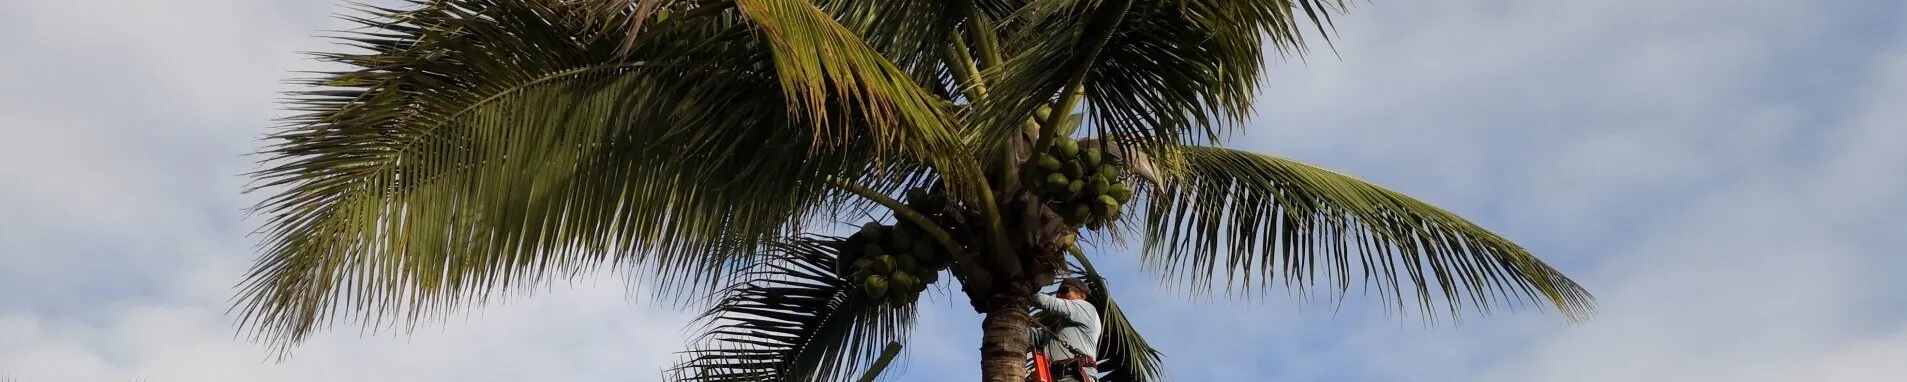 Coconuts being cut from palm in San Diego